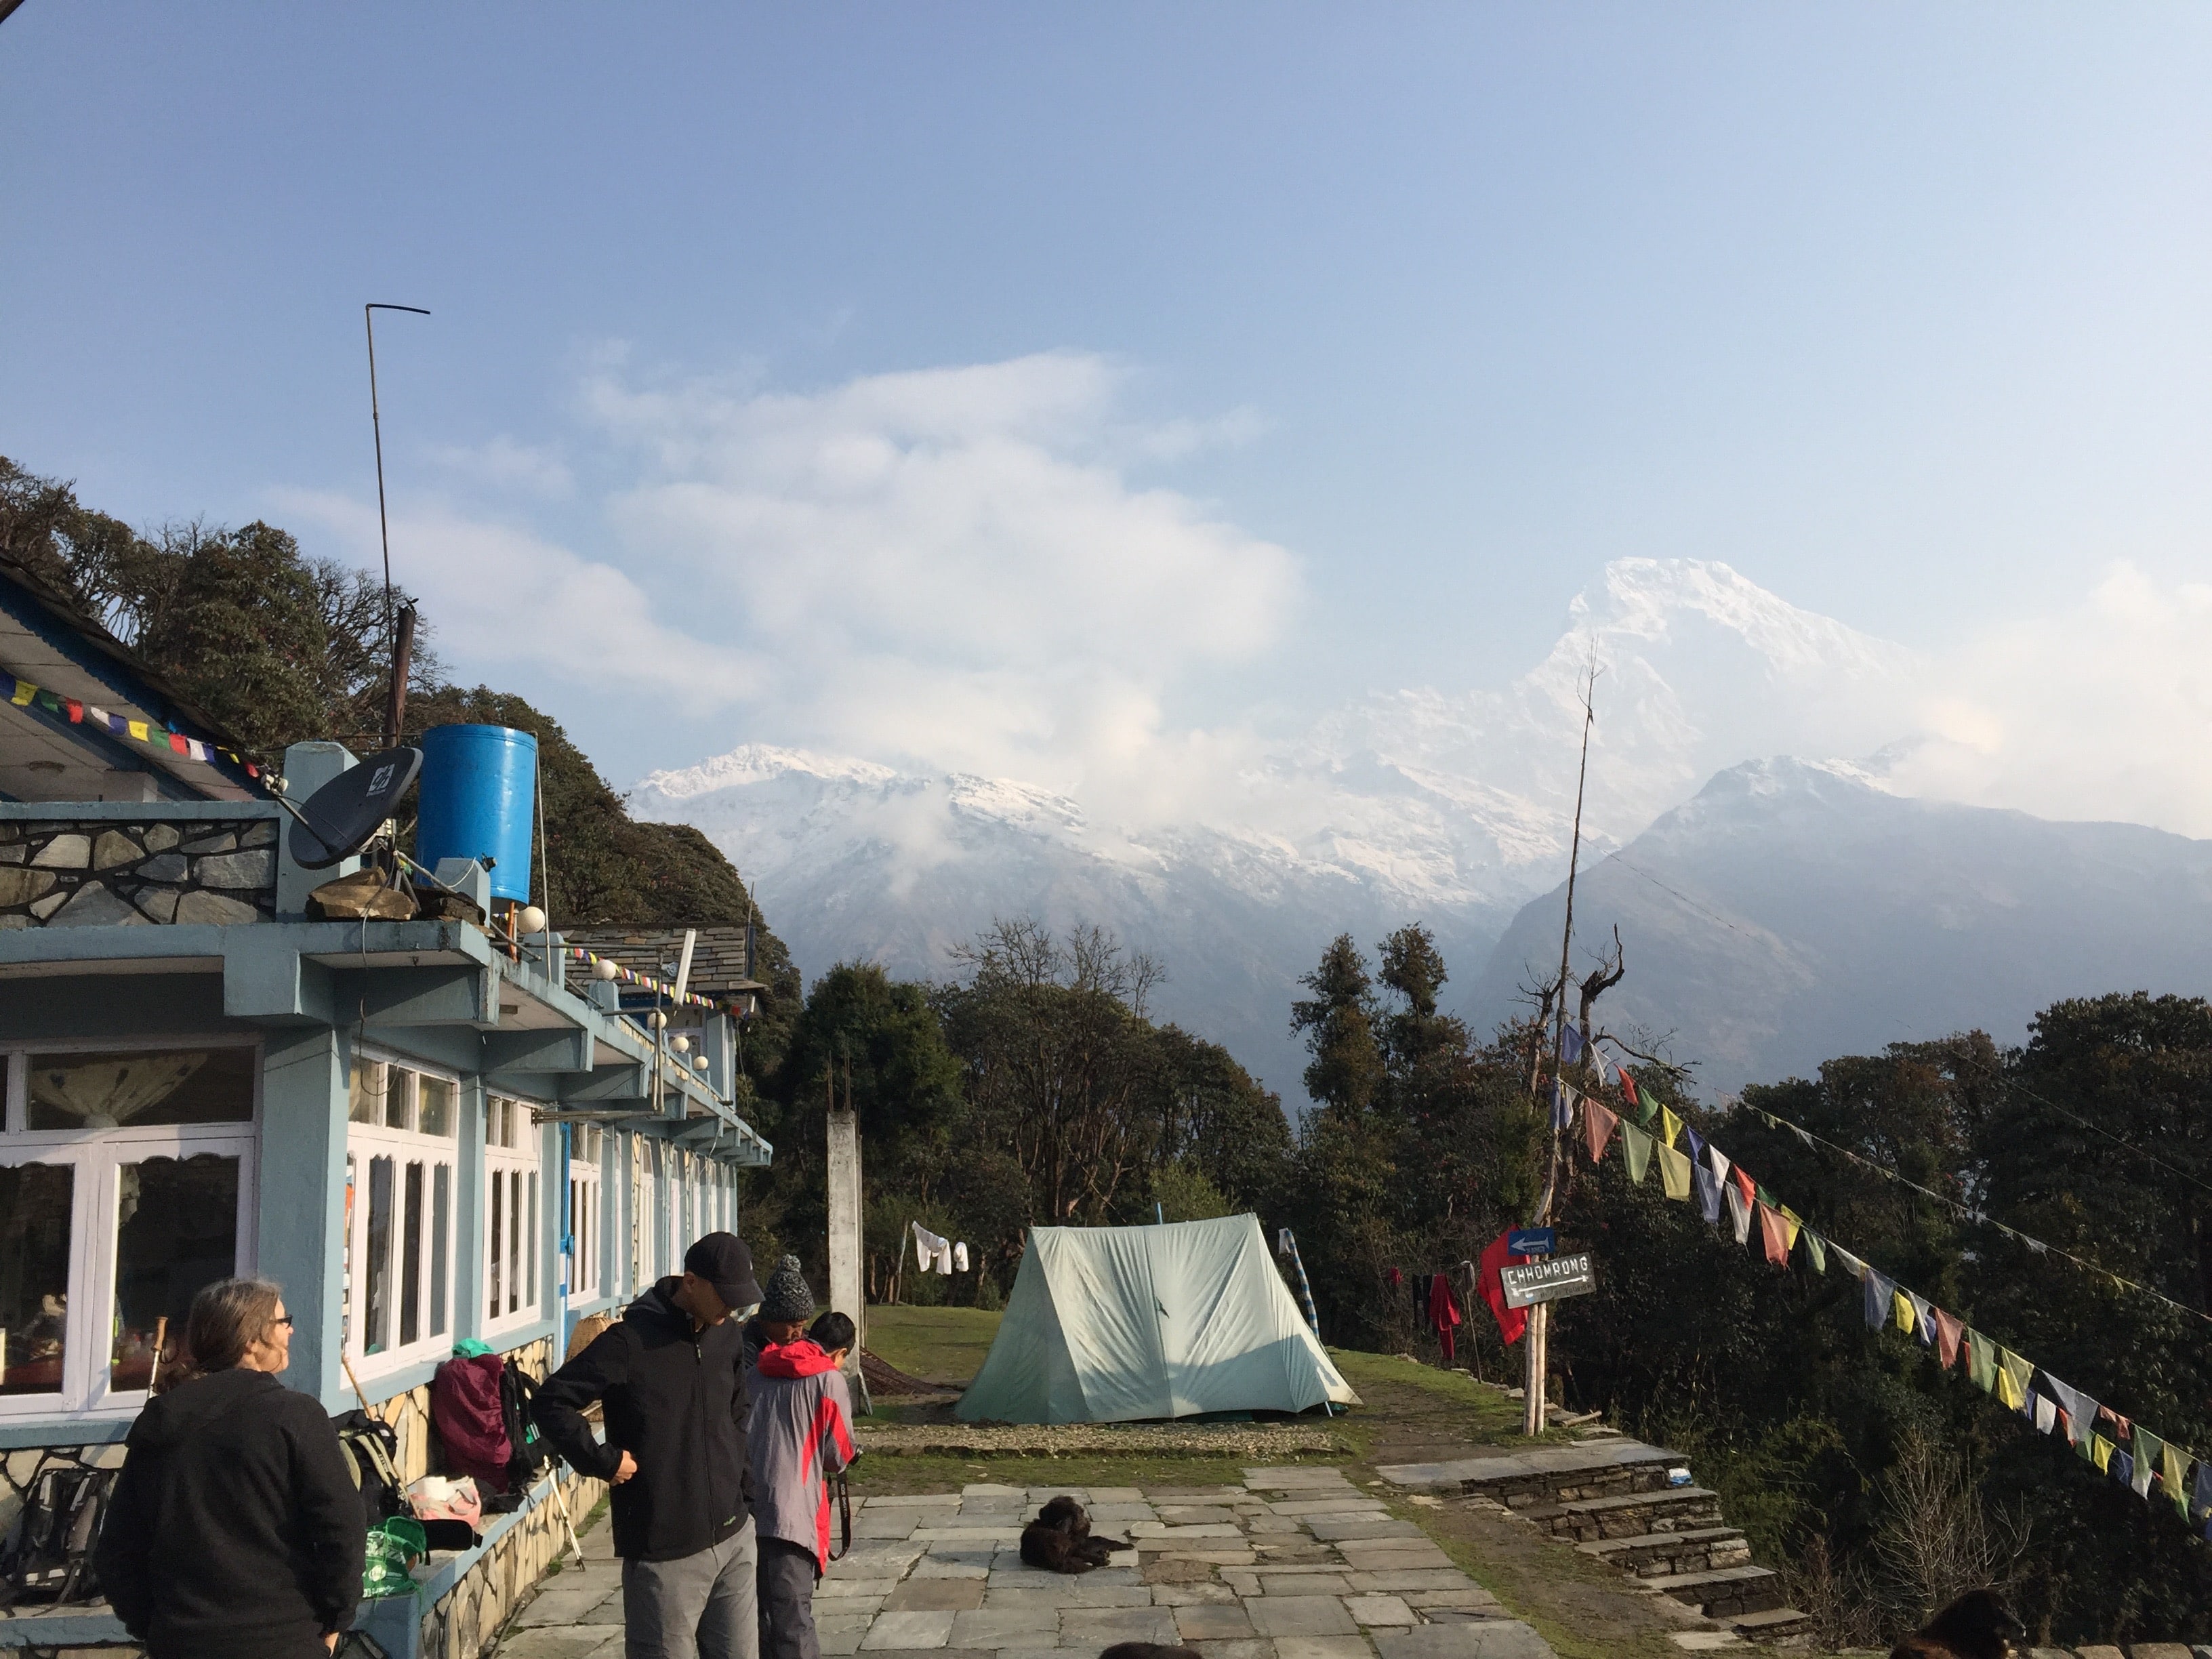 Poon Hill (67) – Little Bells Promiseland Home, Giving hope to the ...